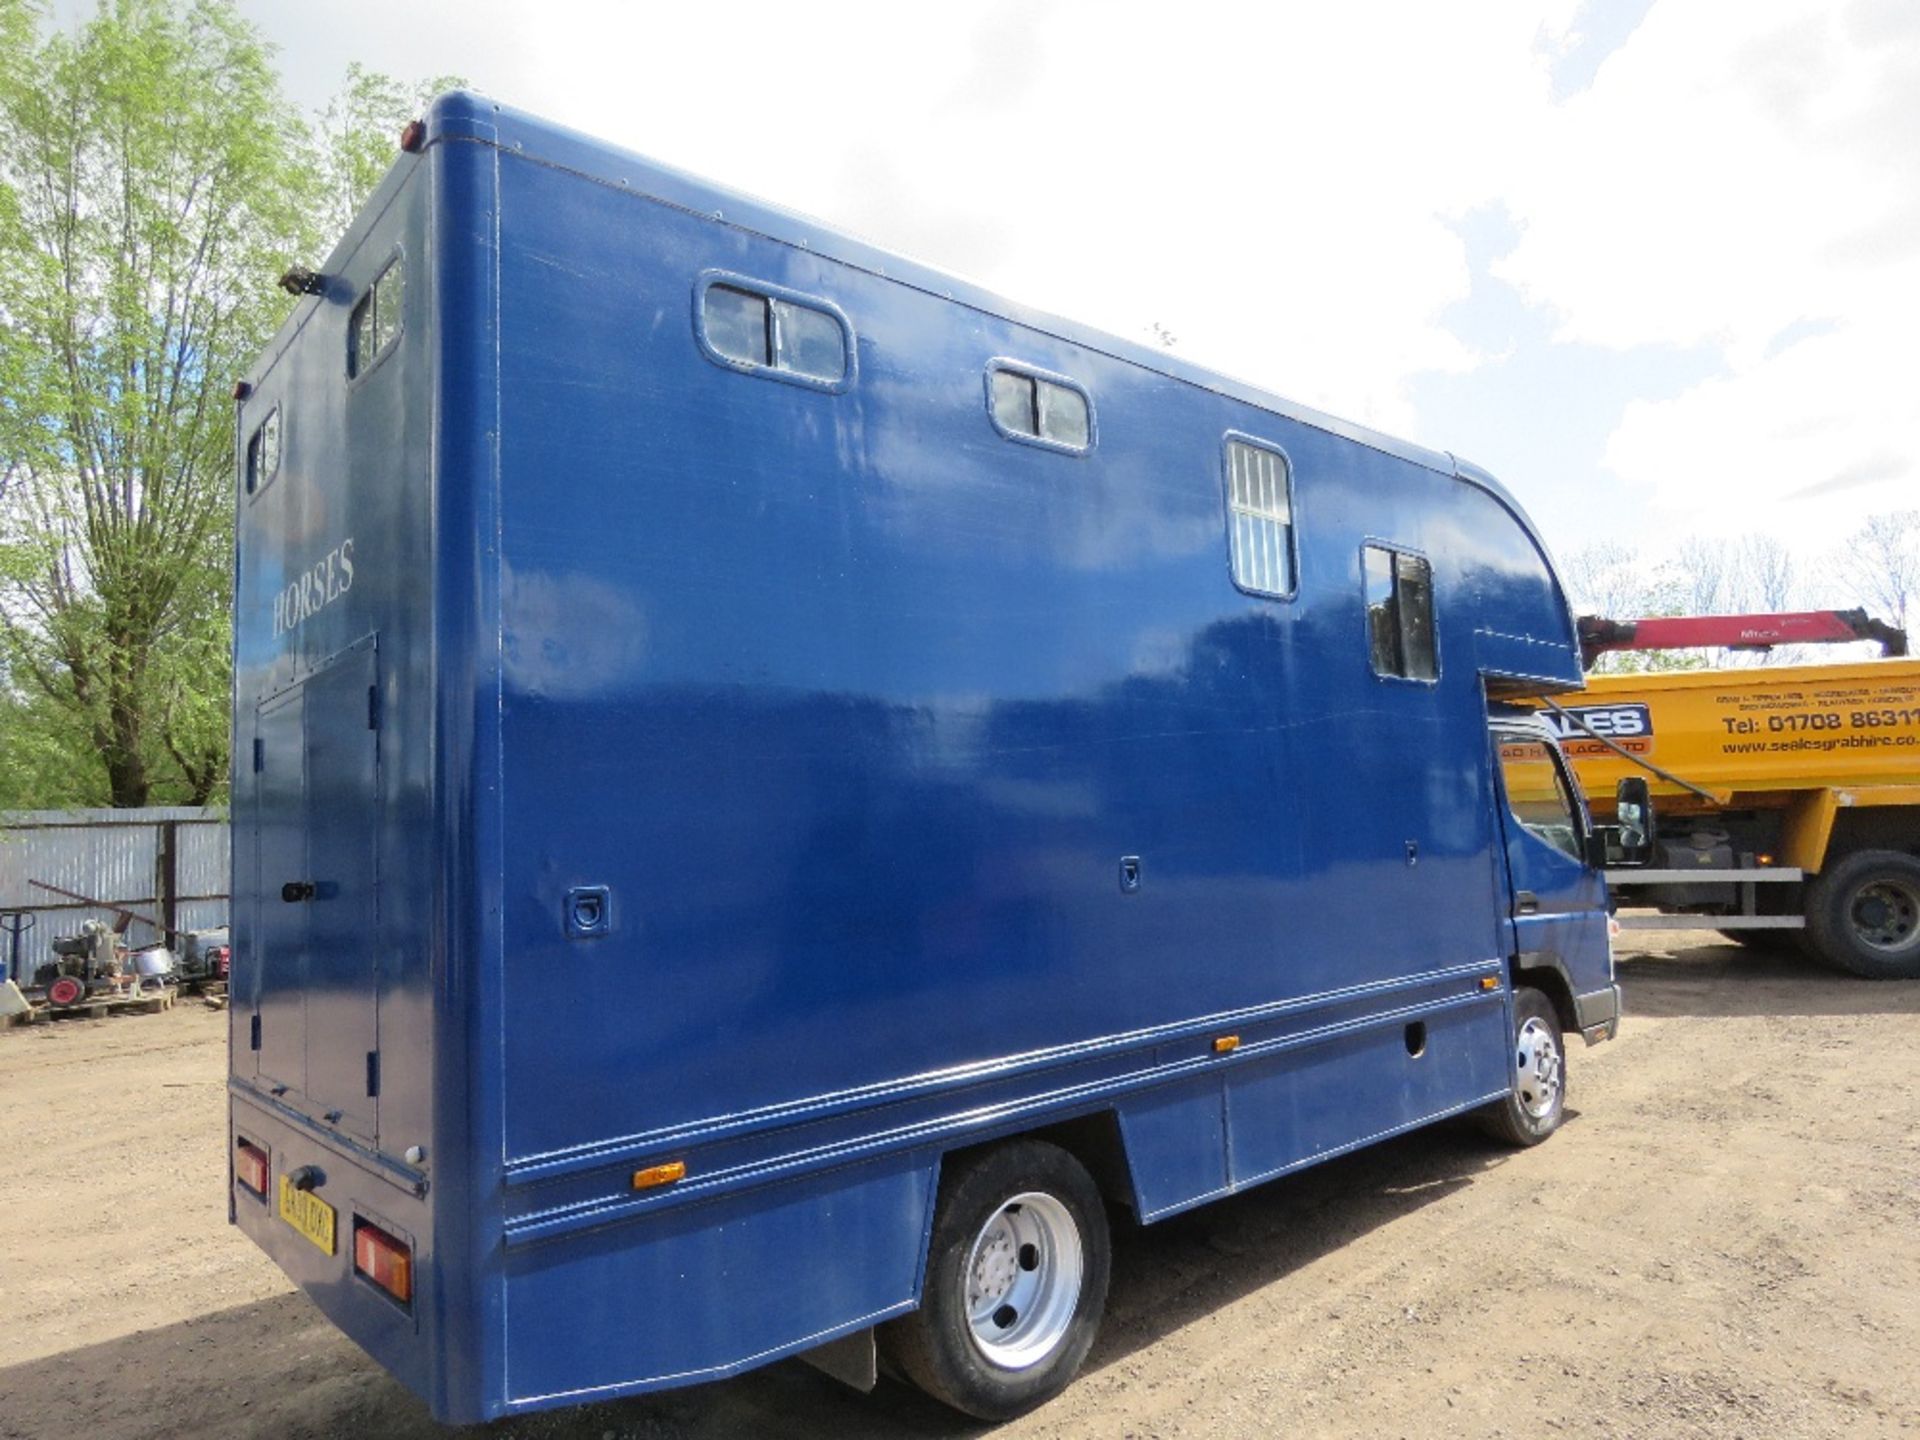 MITSUBISHI CANTER HORSE BOX LORRY REG:GK09 OXG. V5 AND PLATING CERTIFICATE IN OFFICE. MOT EXPIRED. - Bild 9 aus 24